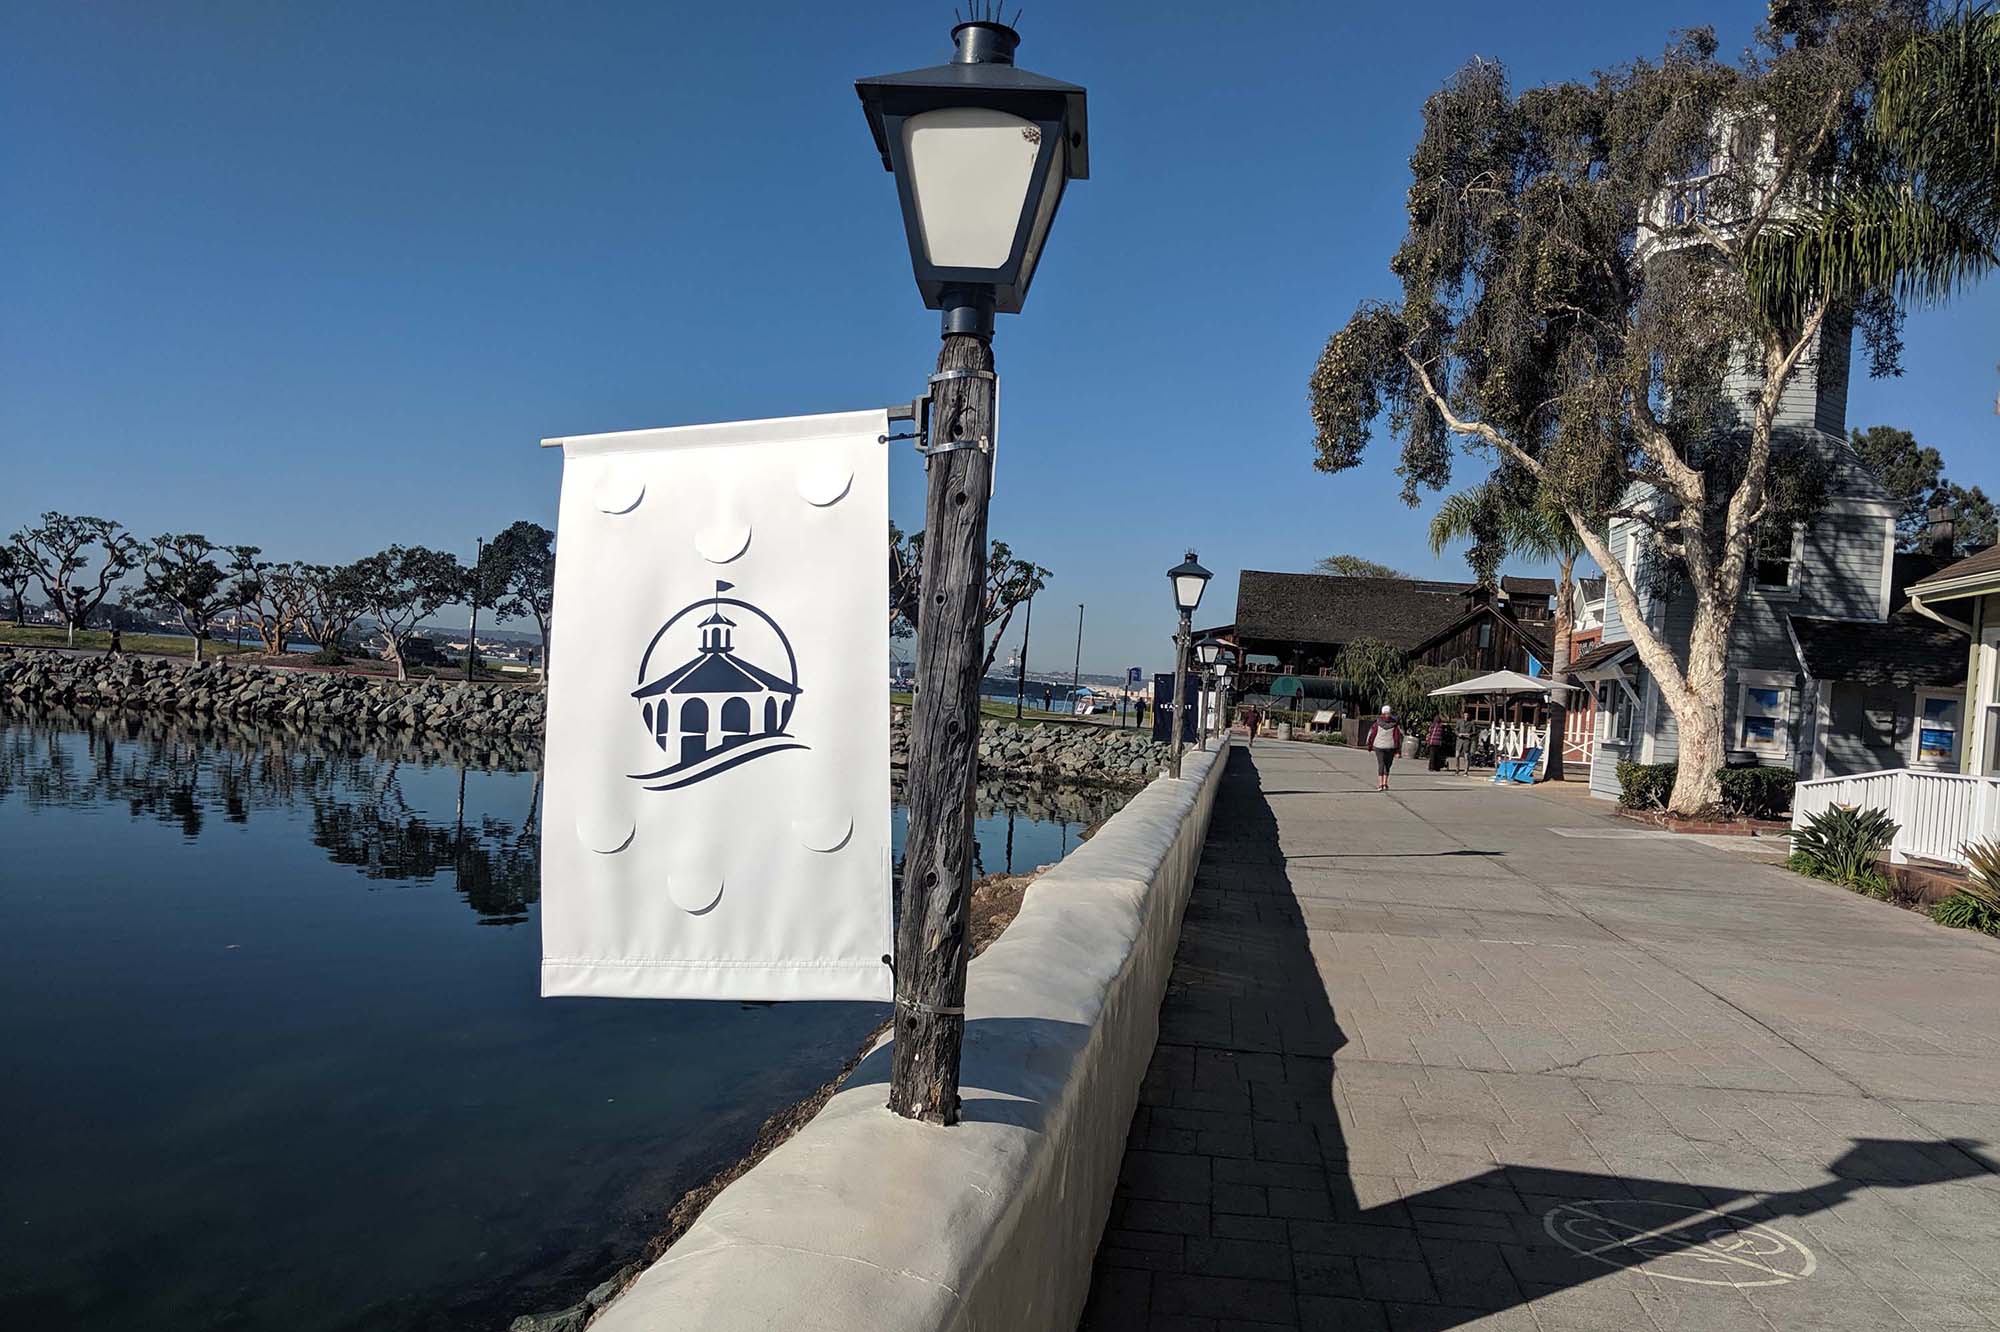 What's New at Seaport Village